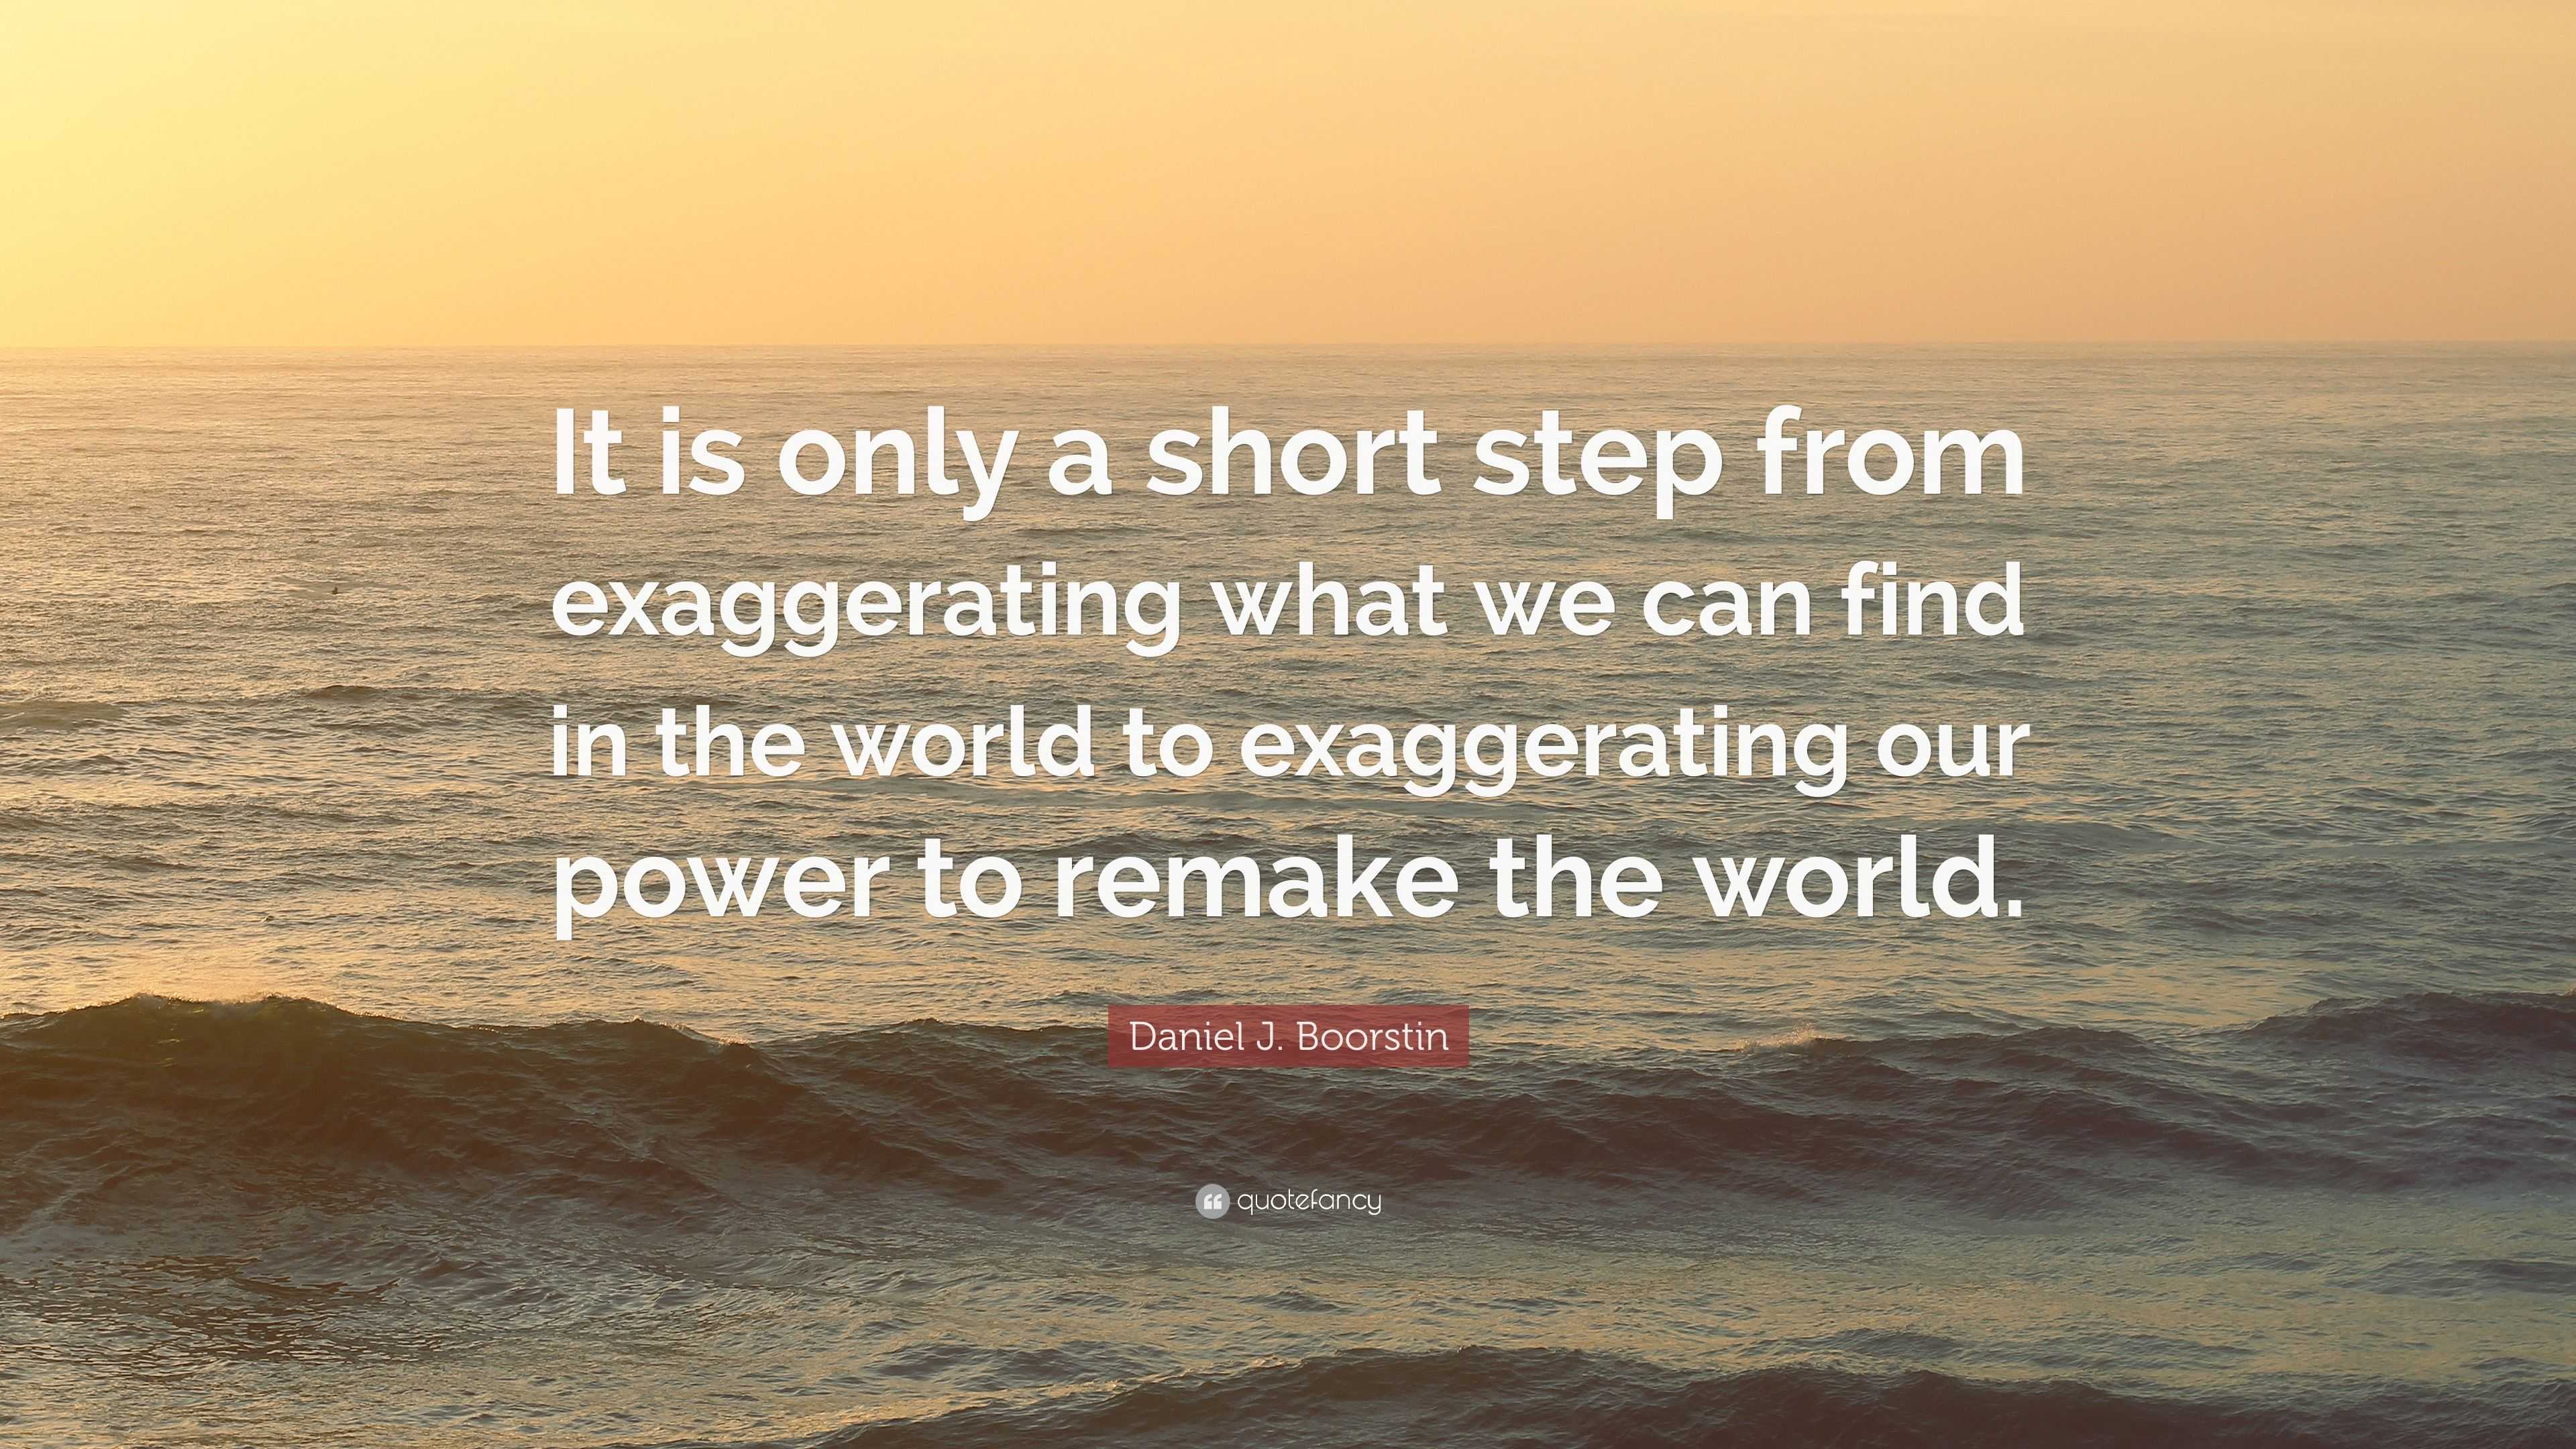 Daniel J. Boorstin Quote: “It is only a short step from exaggerating ...